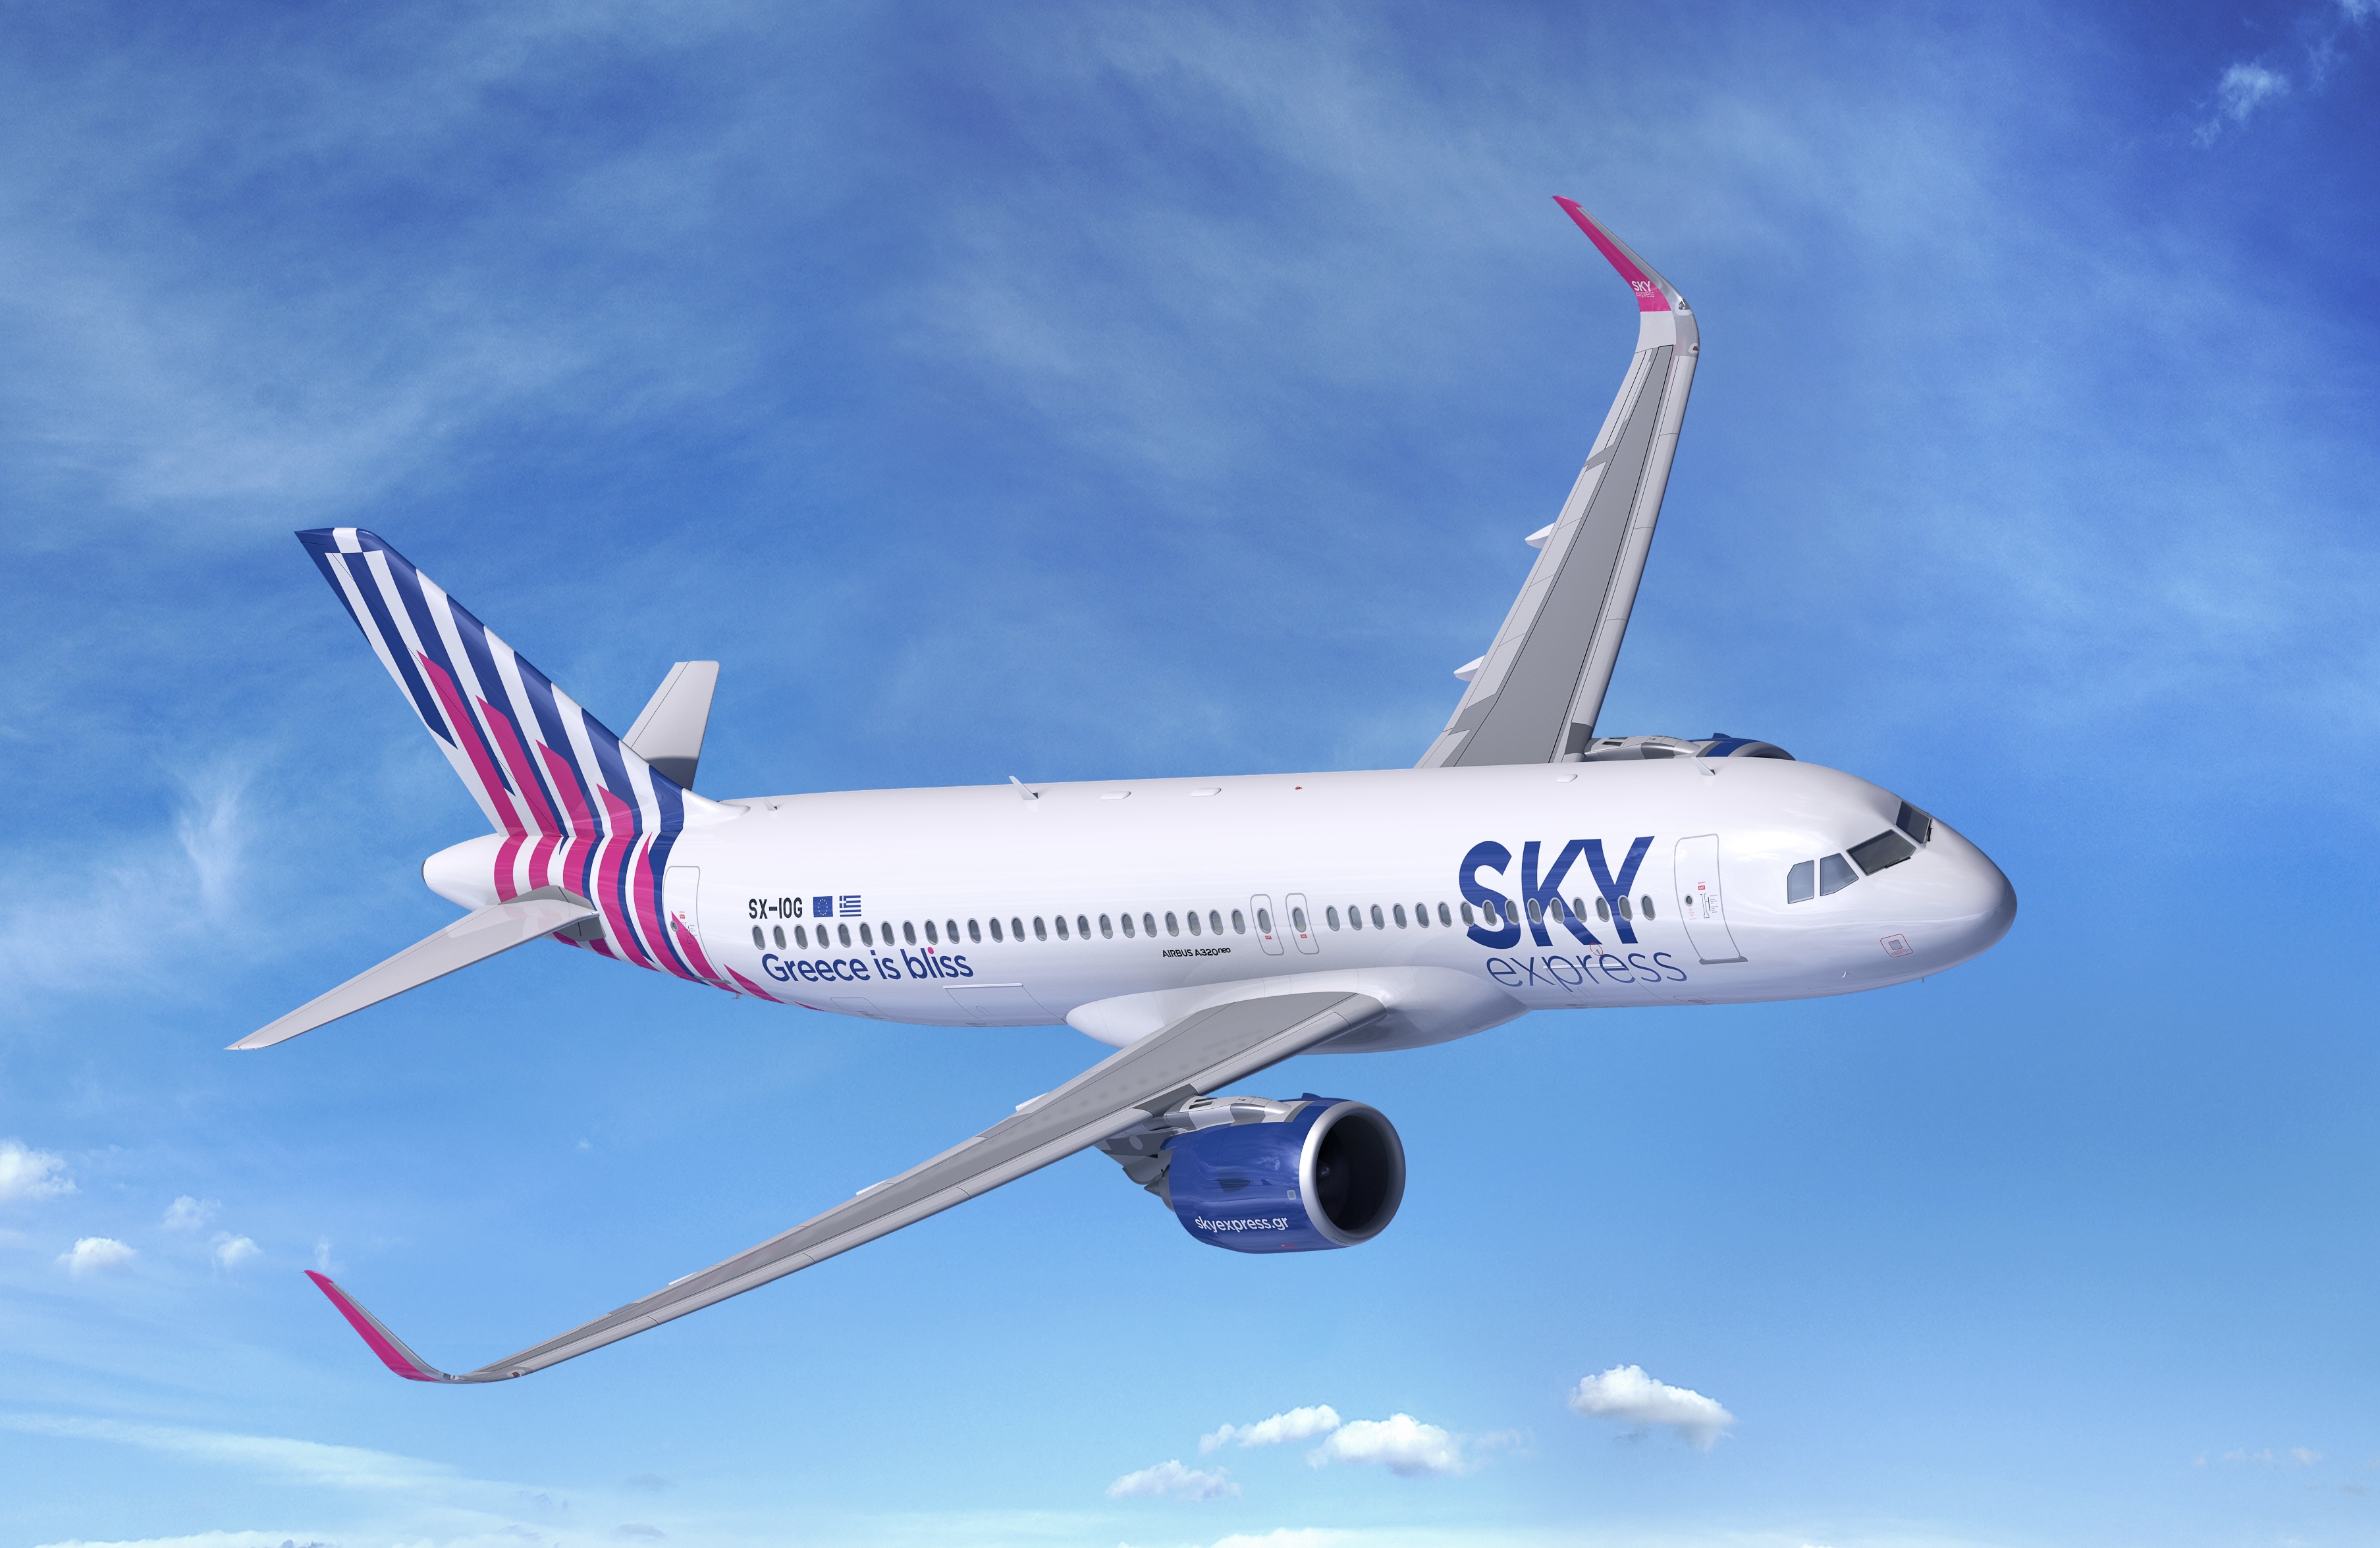 SKY express adds ninth Airbus A320 to its fleet